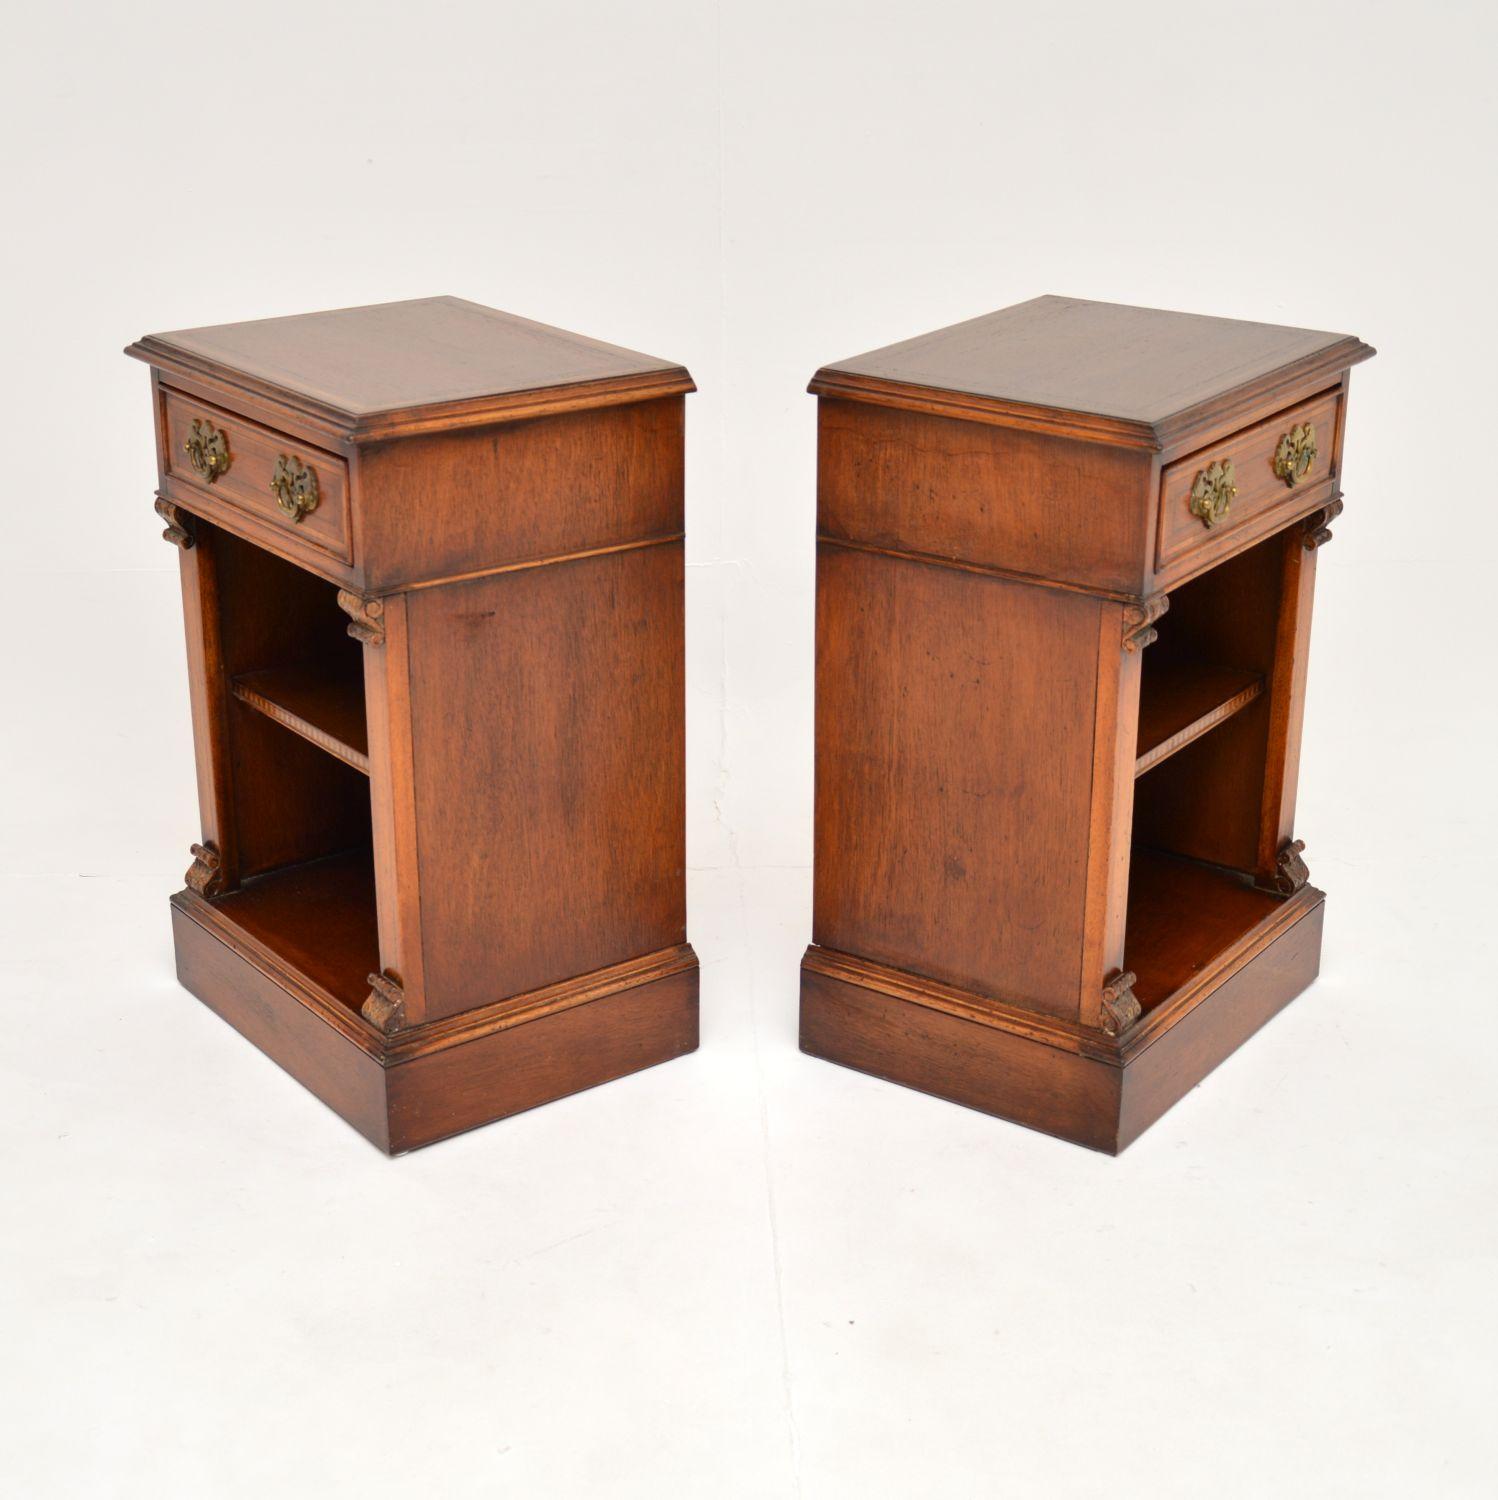 British Pair of Antique Inlaid Bedside Cabinets For Sale